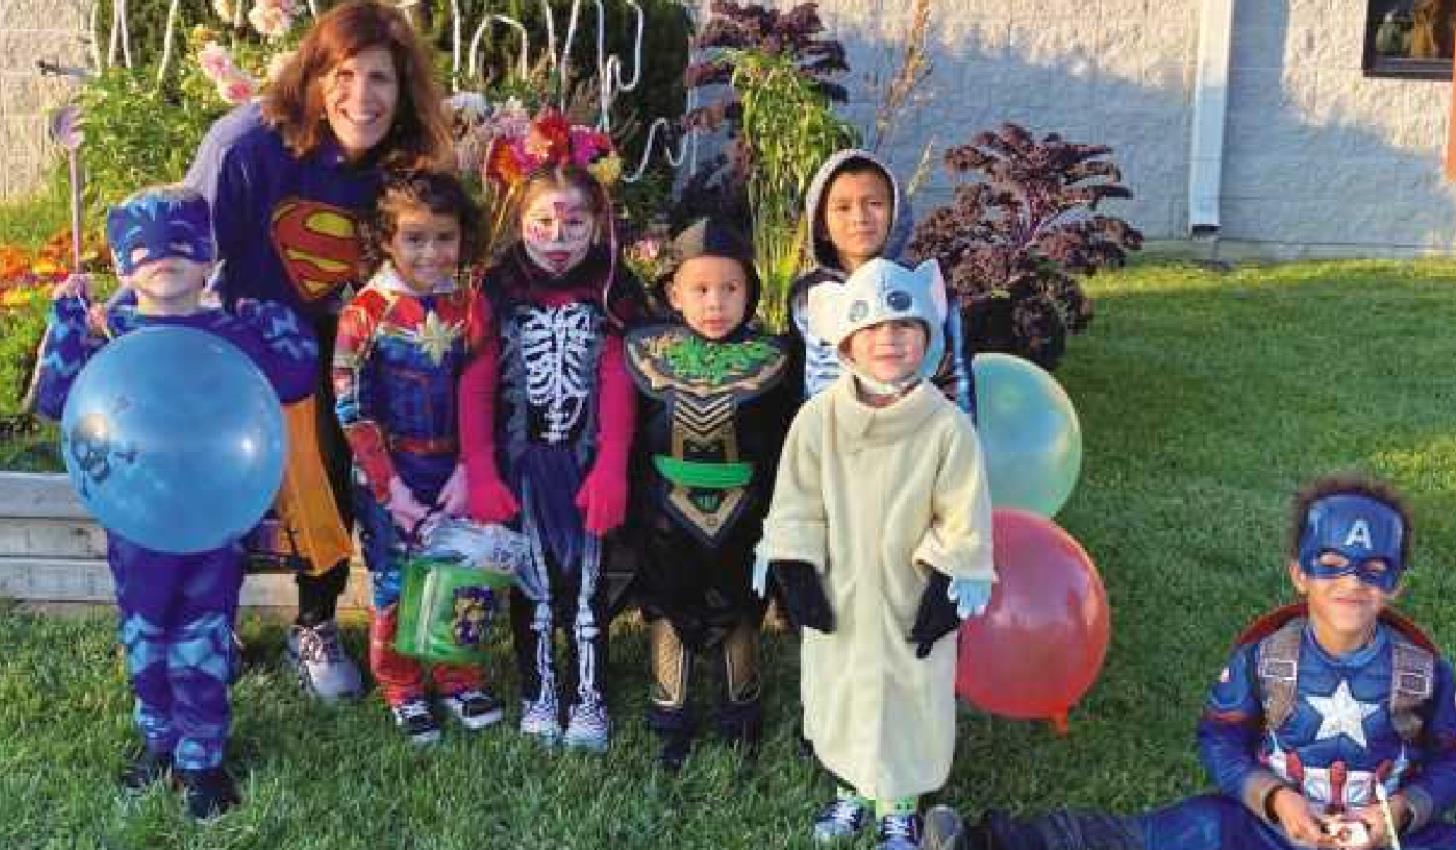 Perrysburg Heights Community Center holds trunk or treat Perrysburg